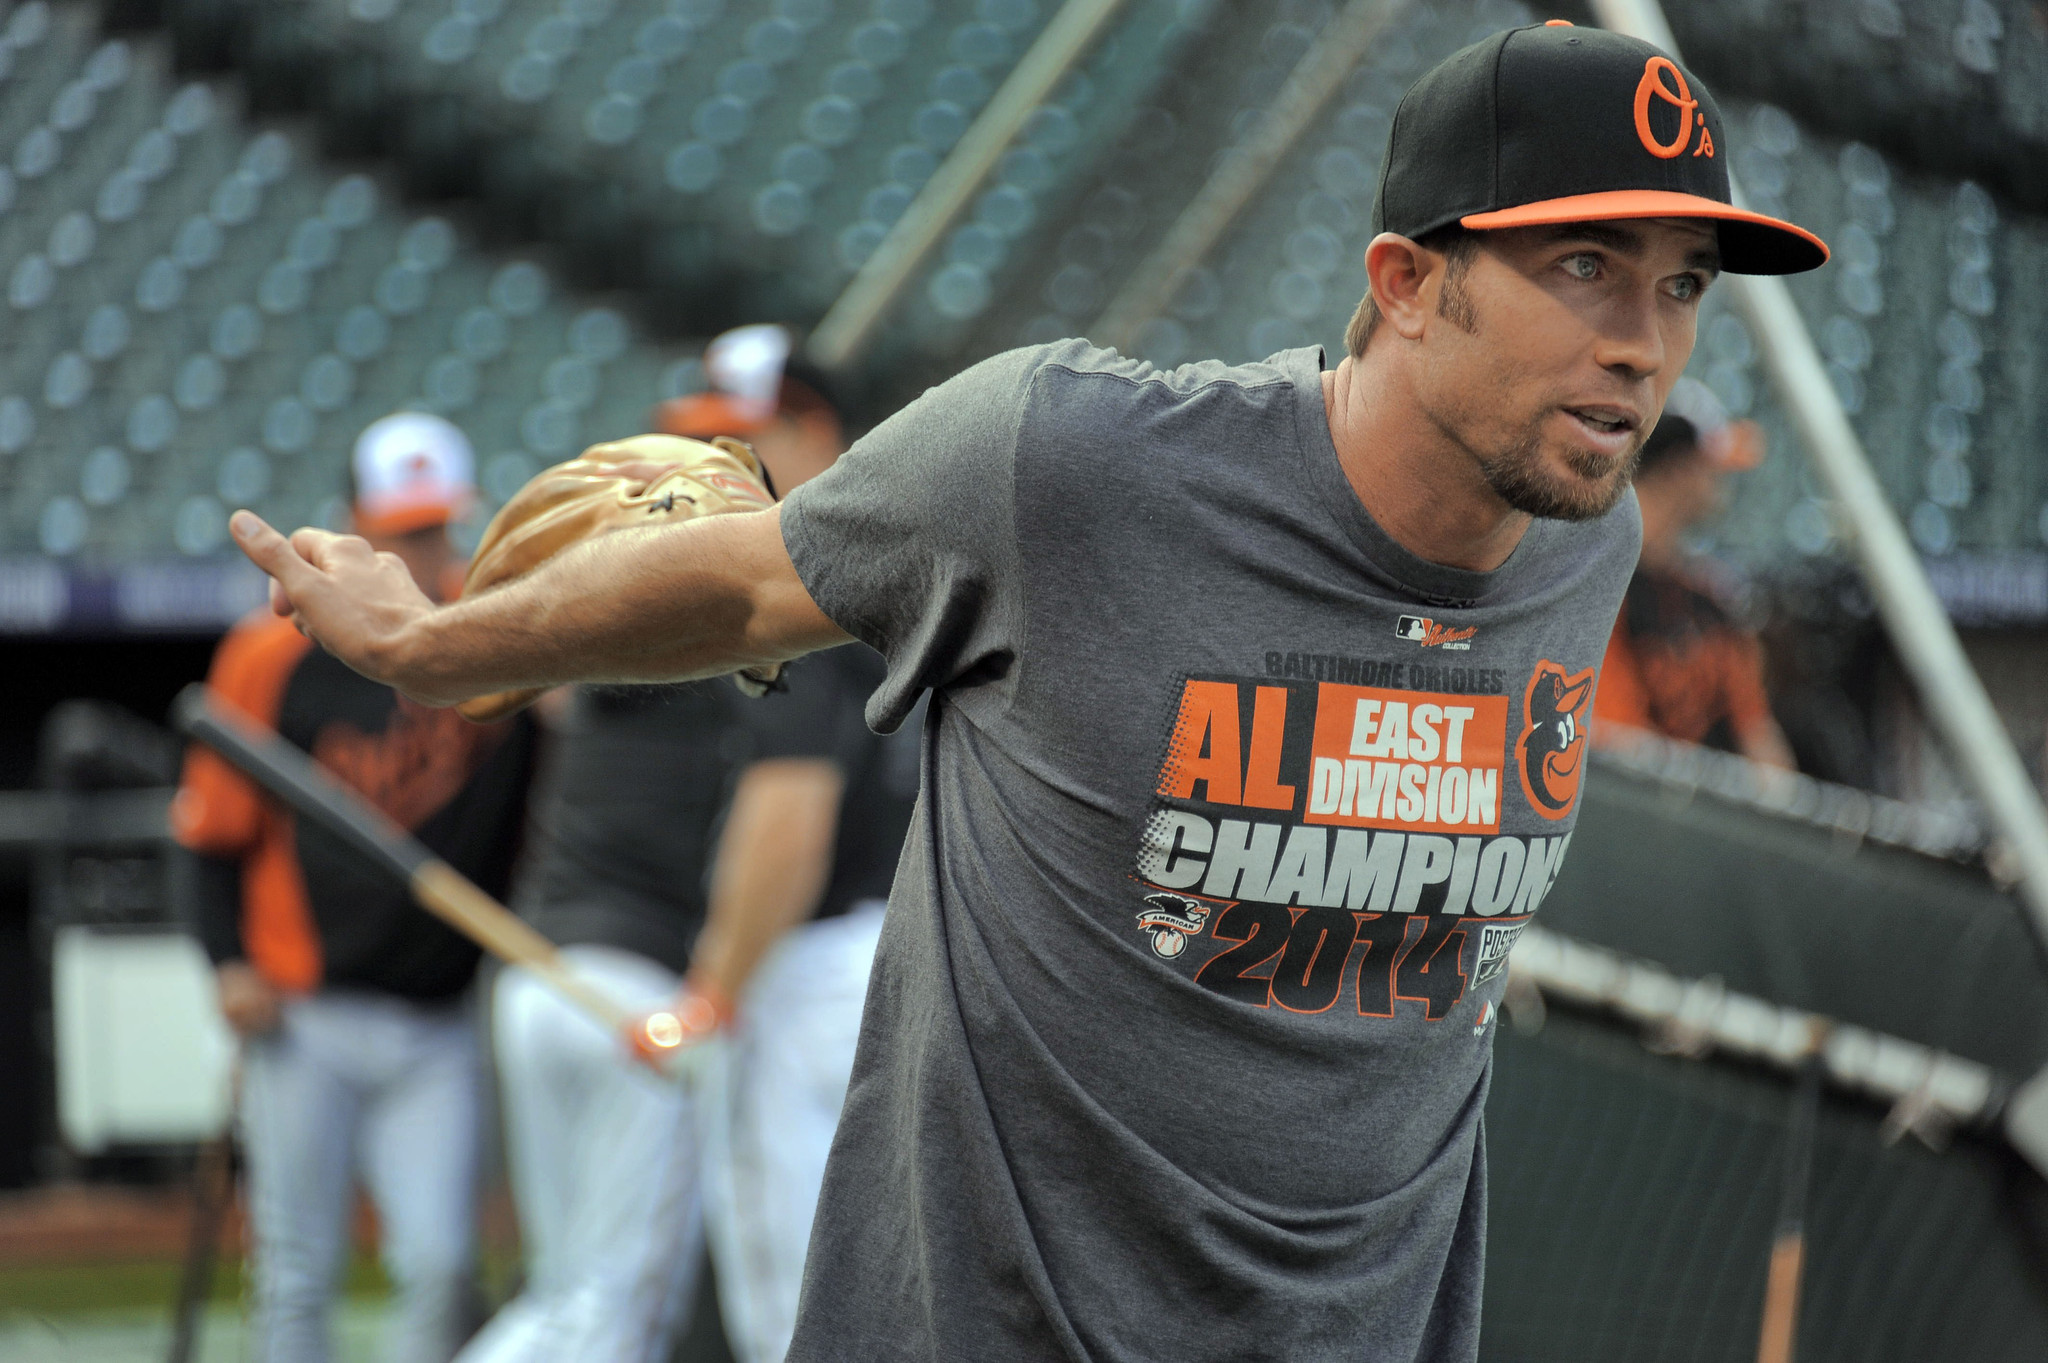 J.J. Hardy, Mike Devereaux Elected To Orioles Hall Of Fame - PressBox